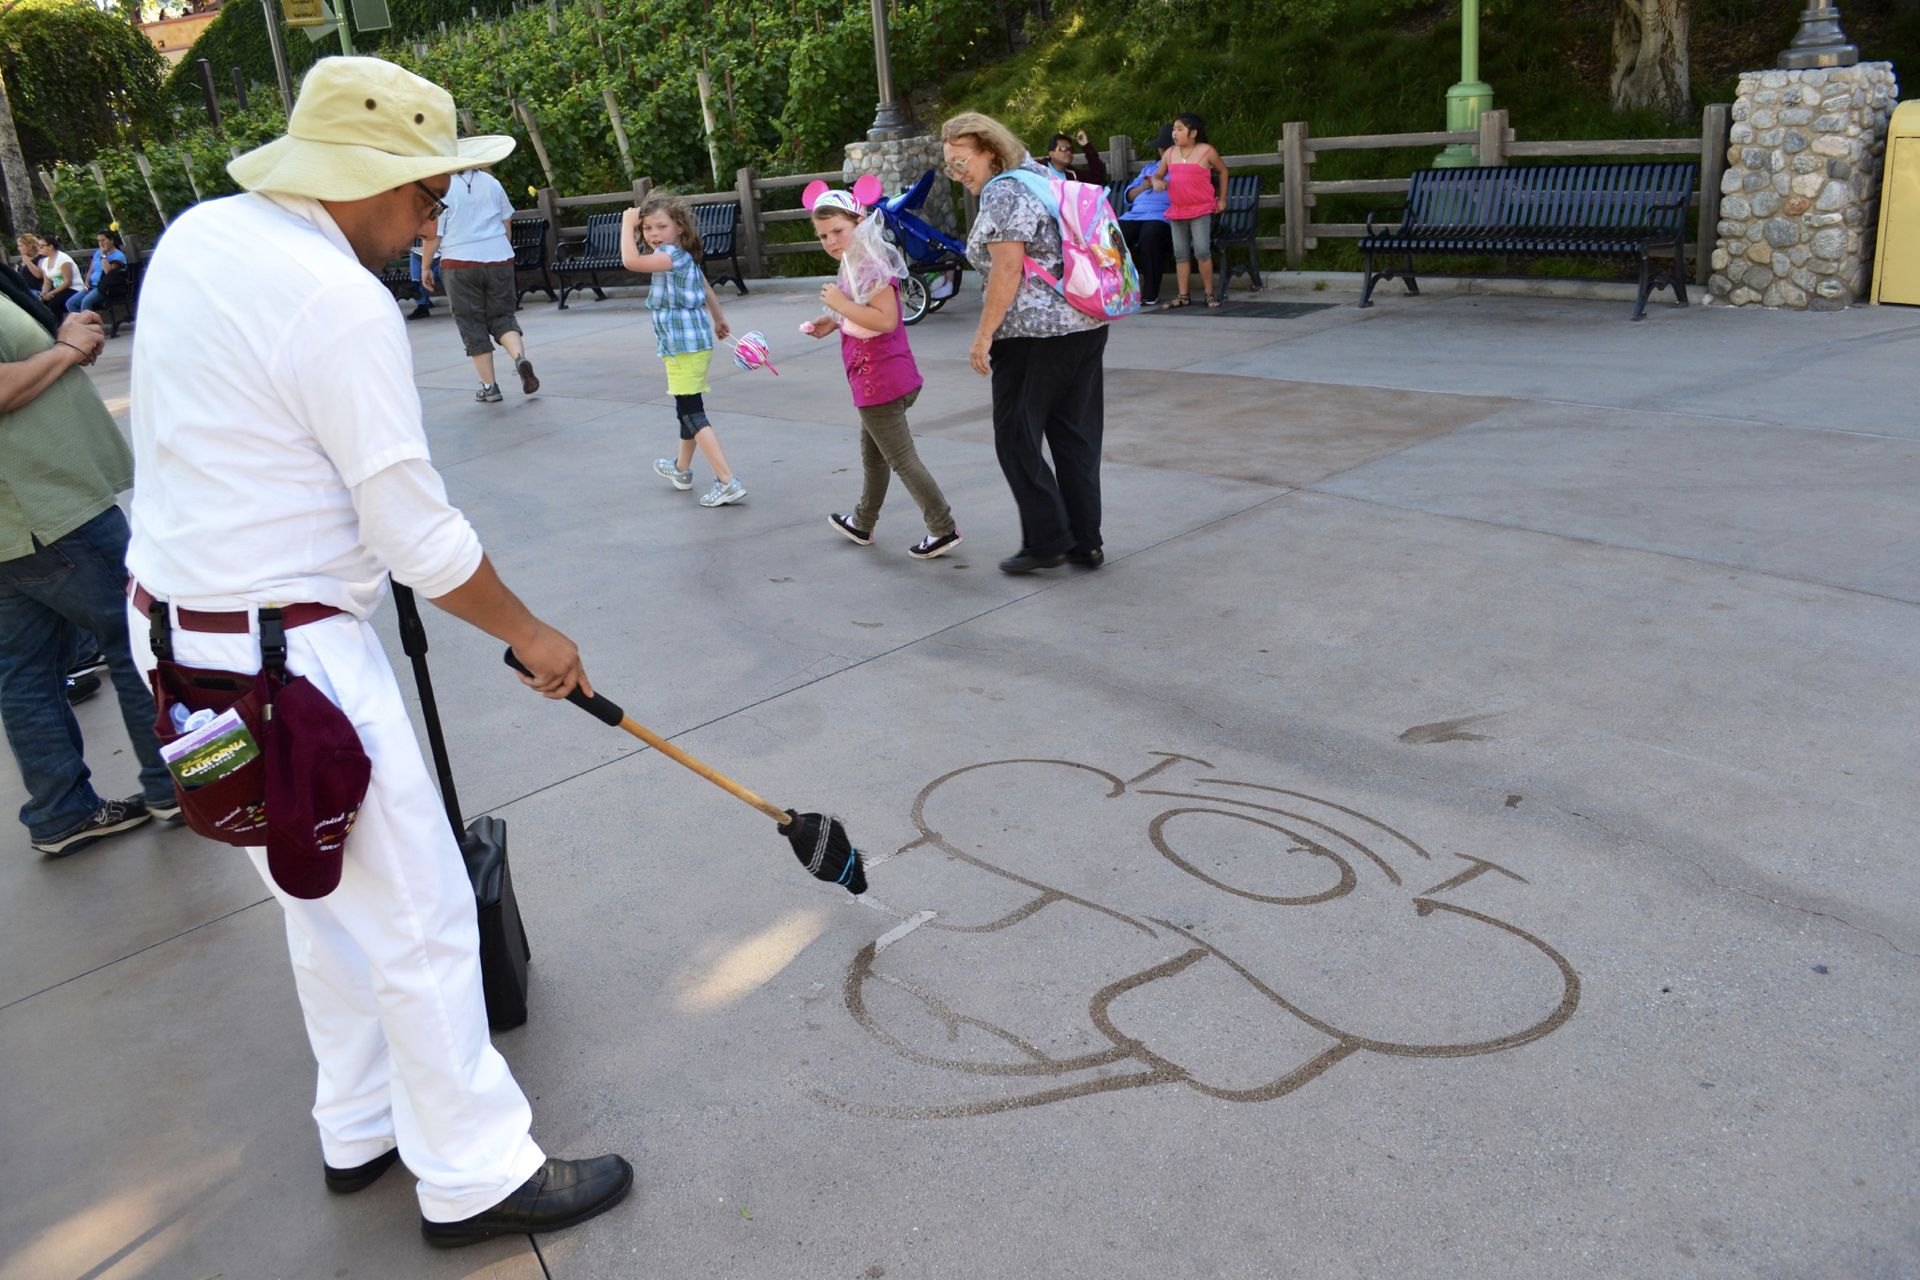 Custodial staff member drawing a Disney character with a mop